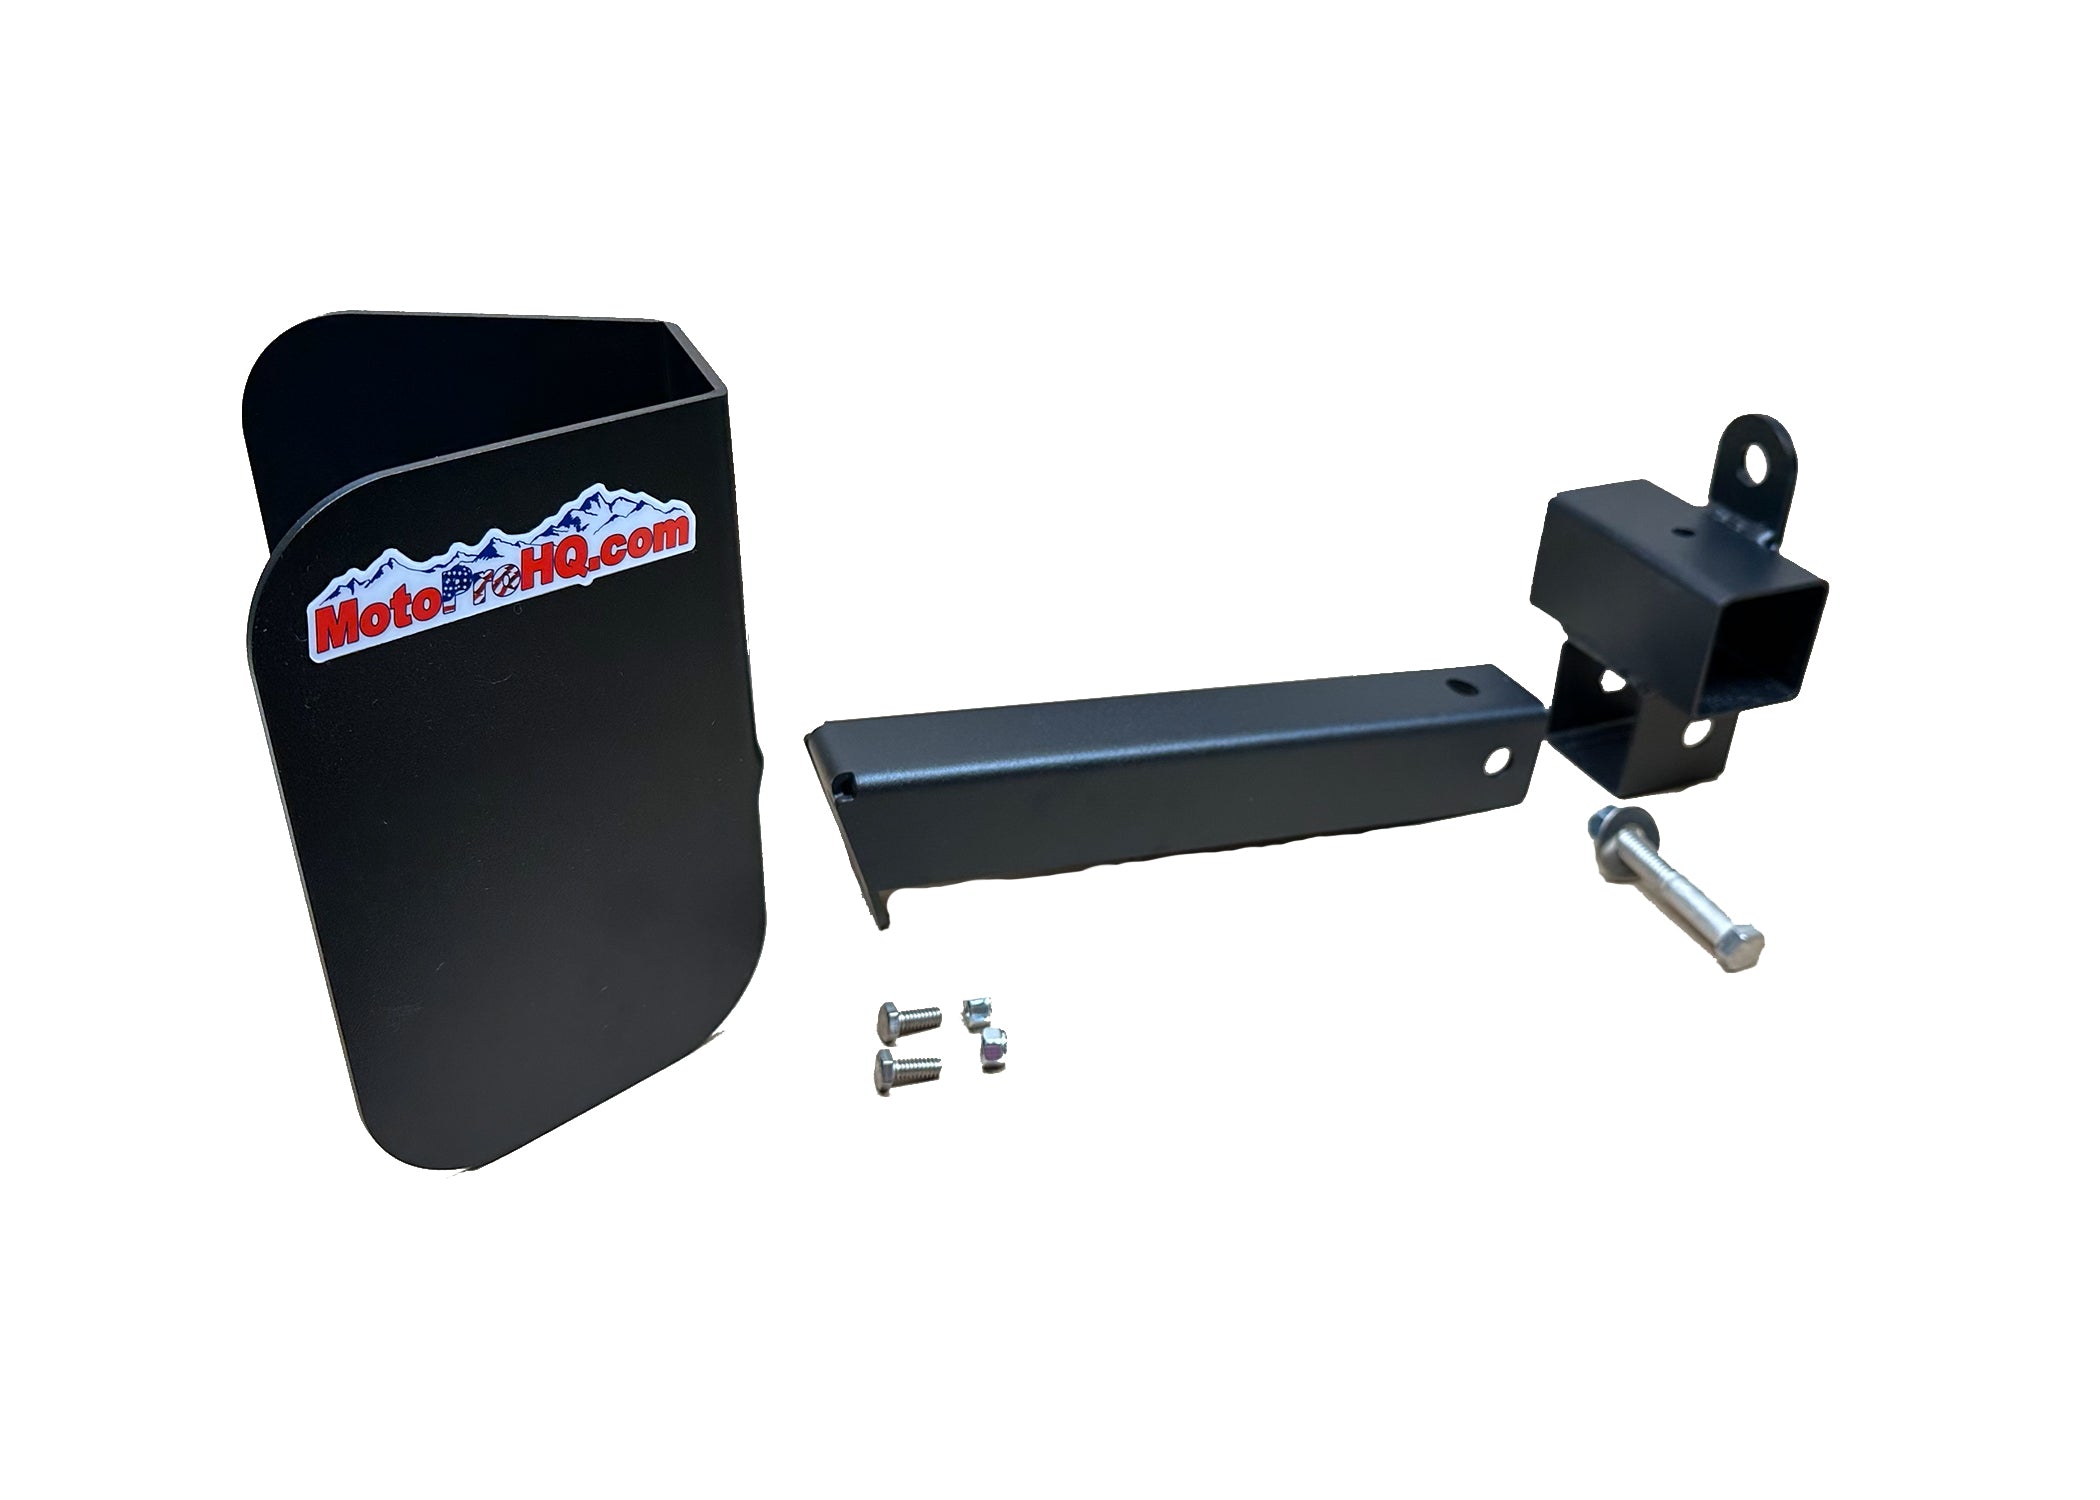 NiceRack Motorcycle Carrier | Pedestal Systems for toy haulers & trailers